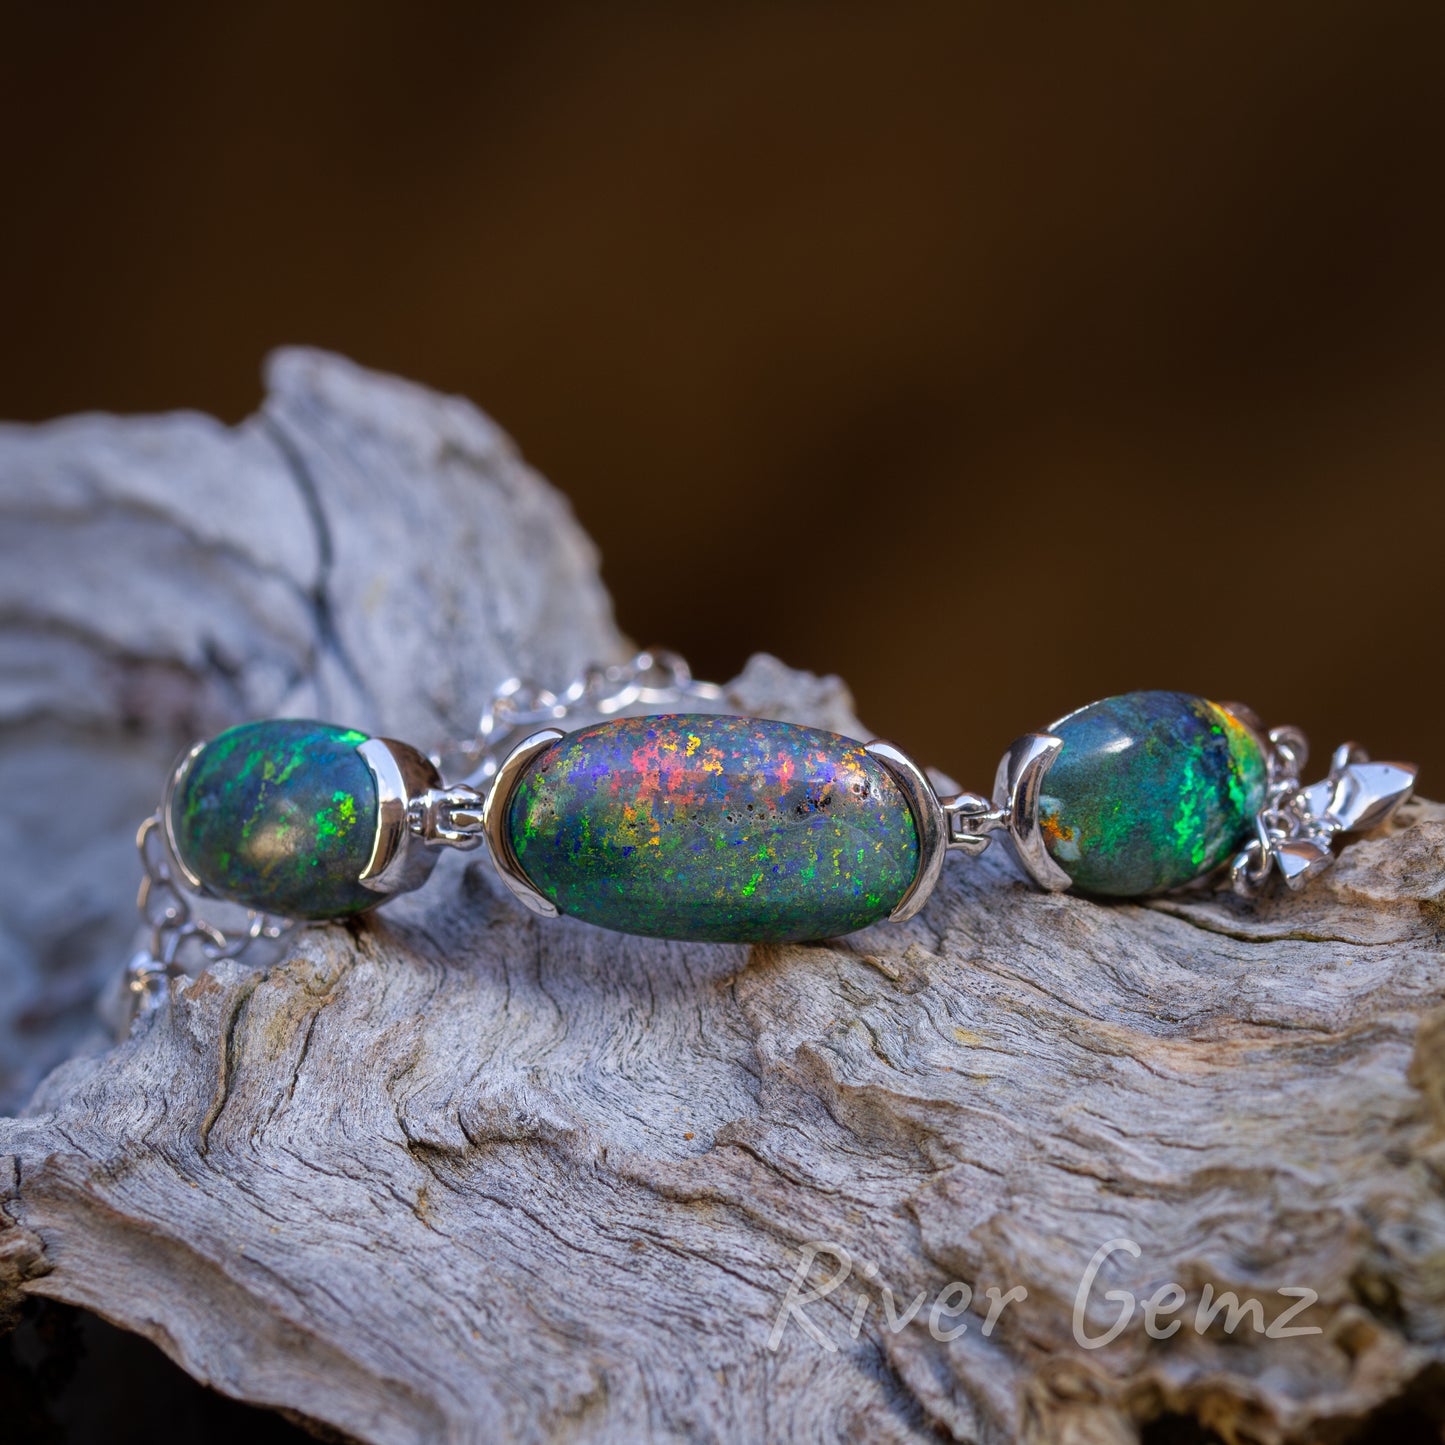 3 oval shaped equally colourful opals with the largest centred. 